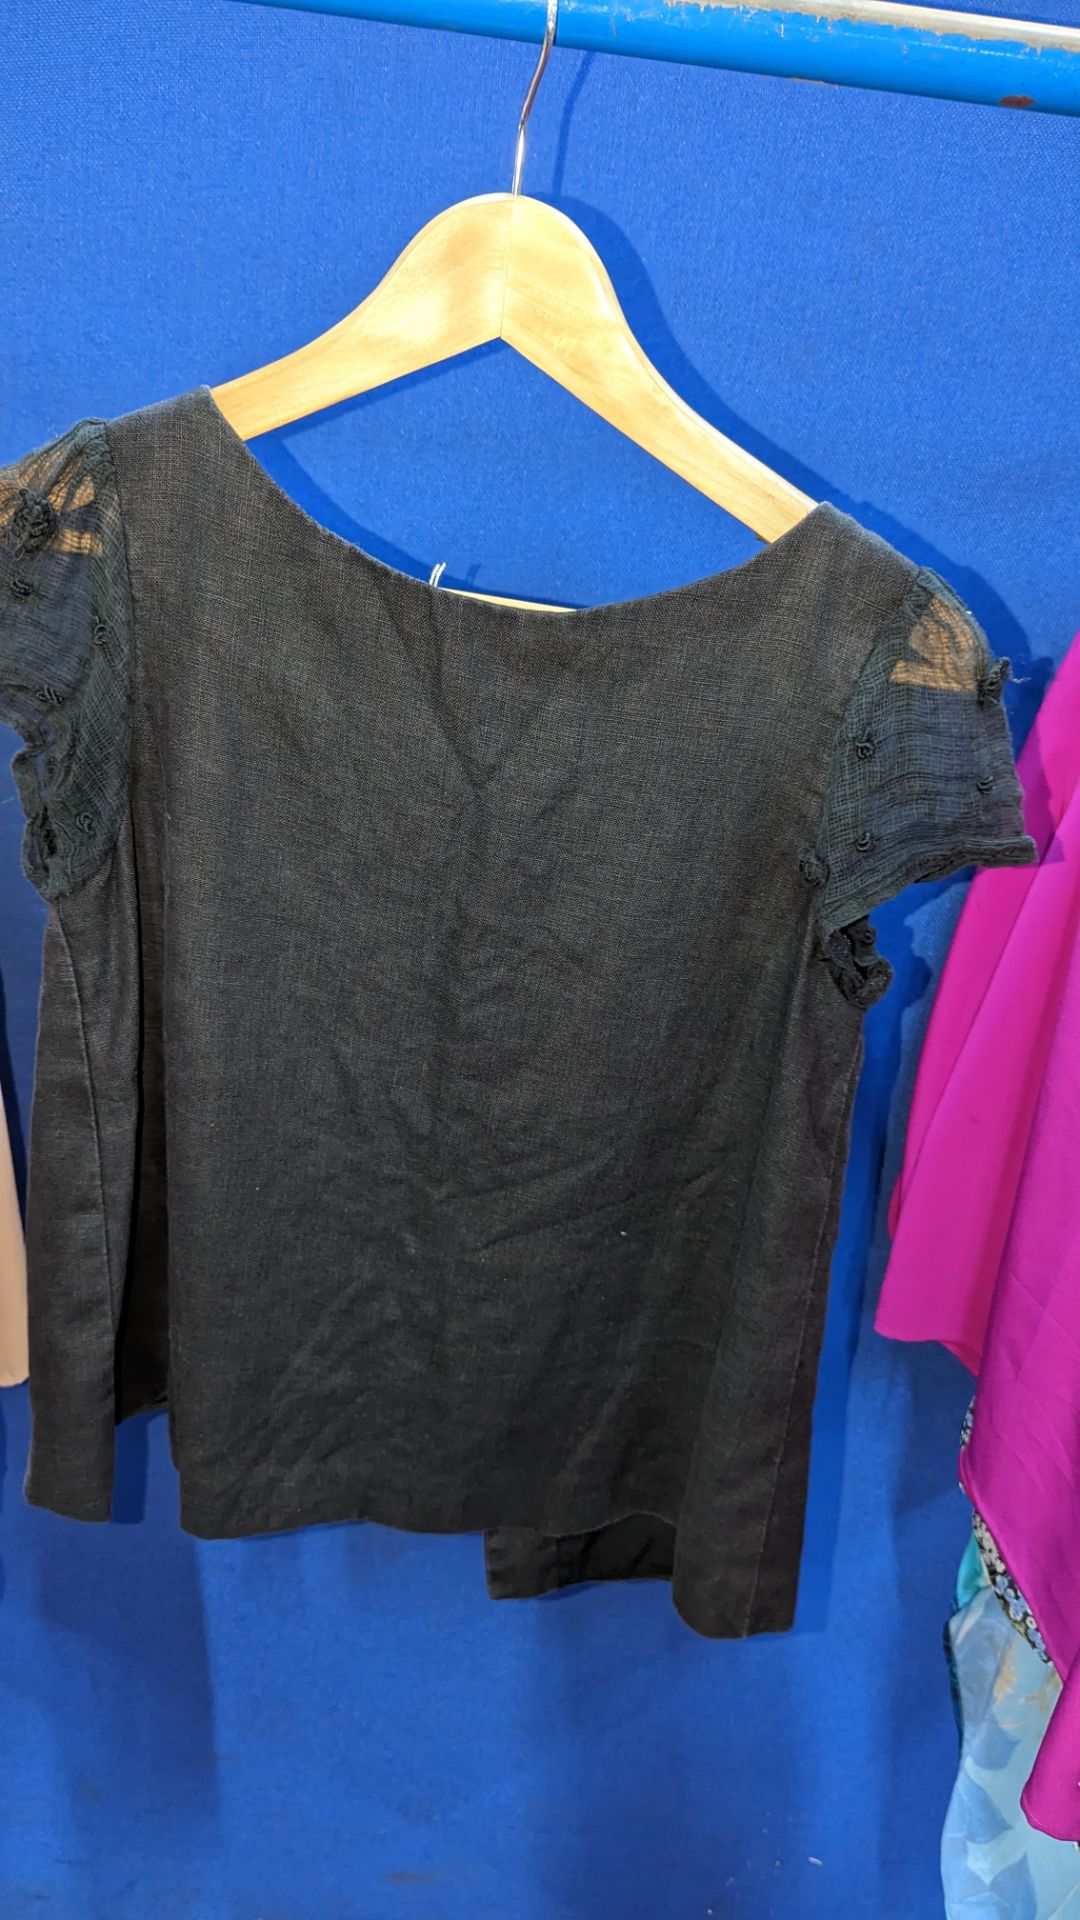 27 assorted ladies tops by a wide variety of brands including Zara, Wayne, Hush, Next, Mint Velvet, - Image 39 of 55